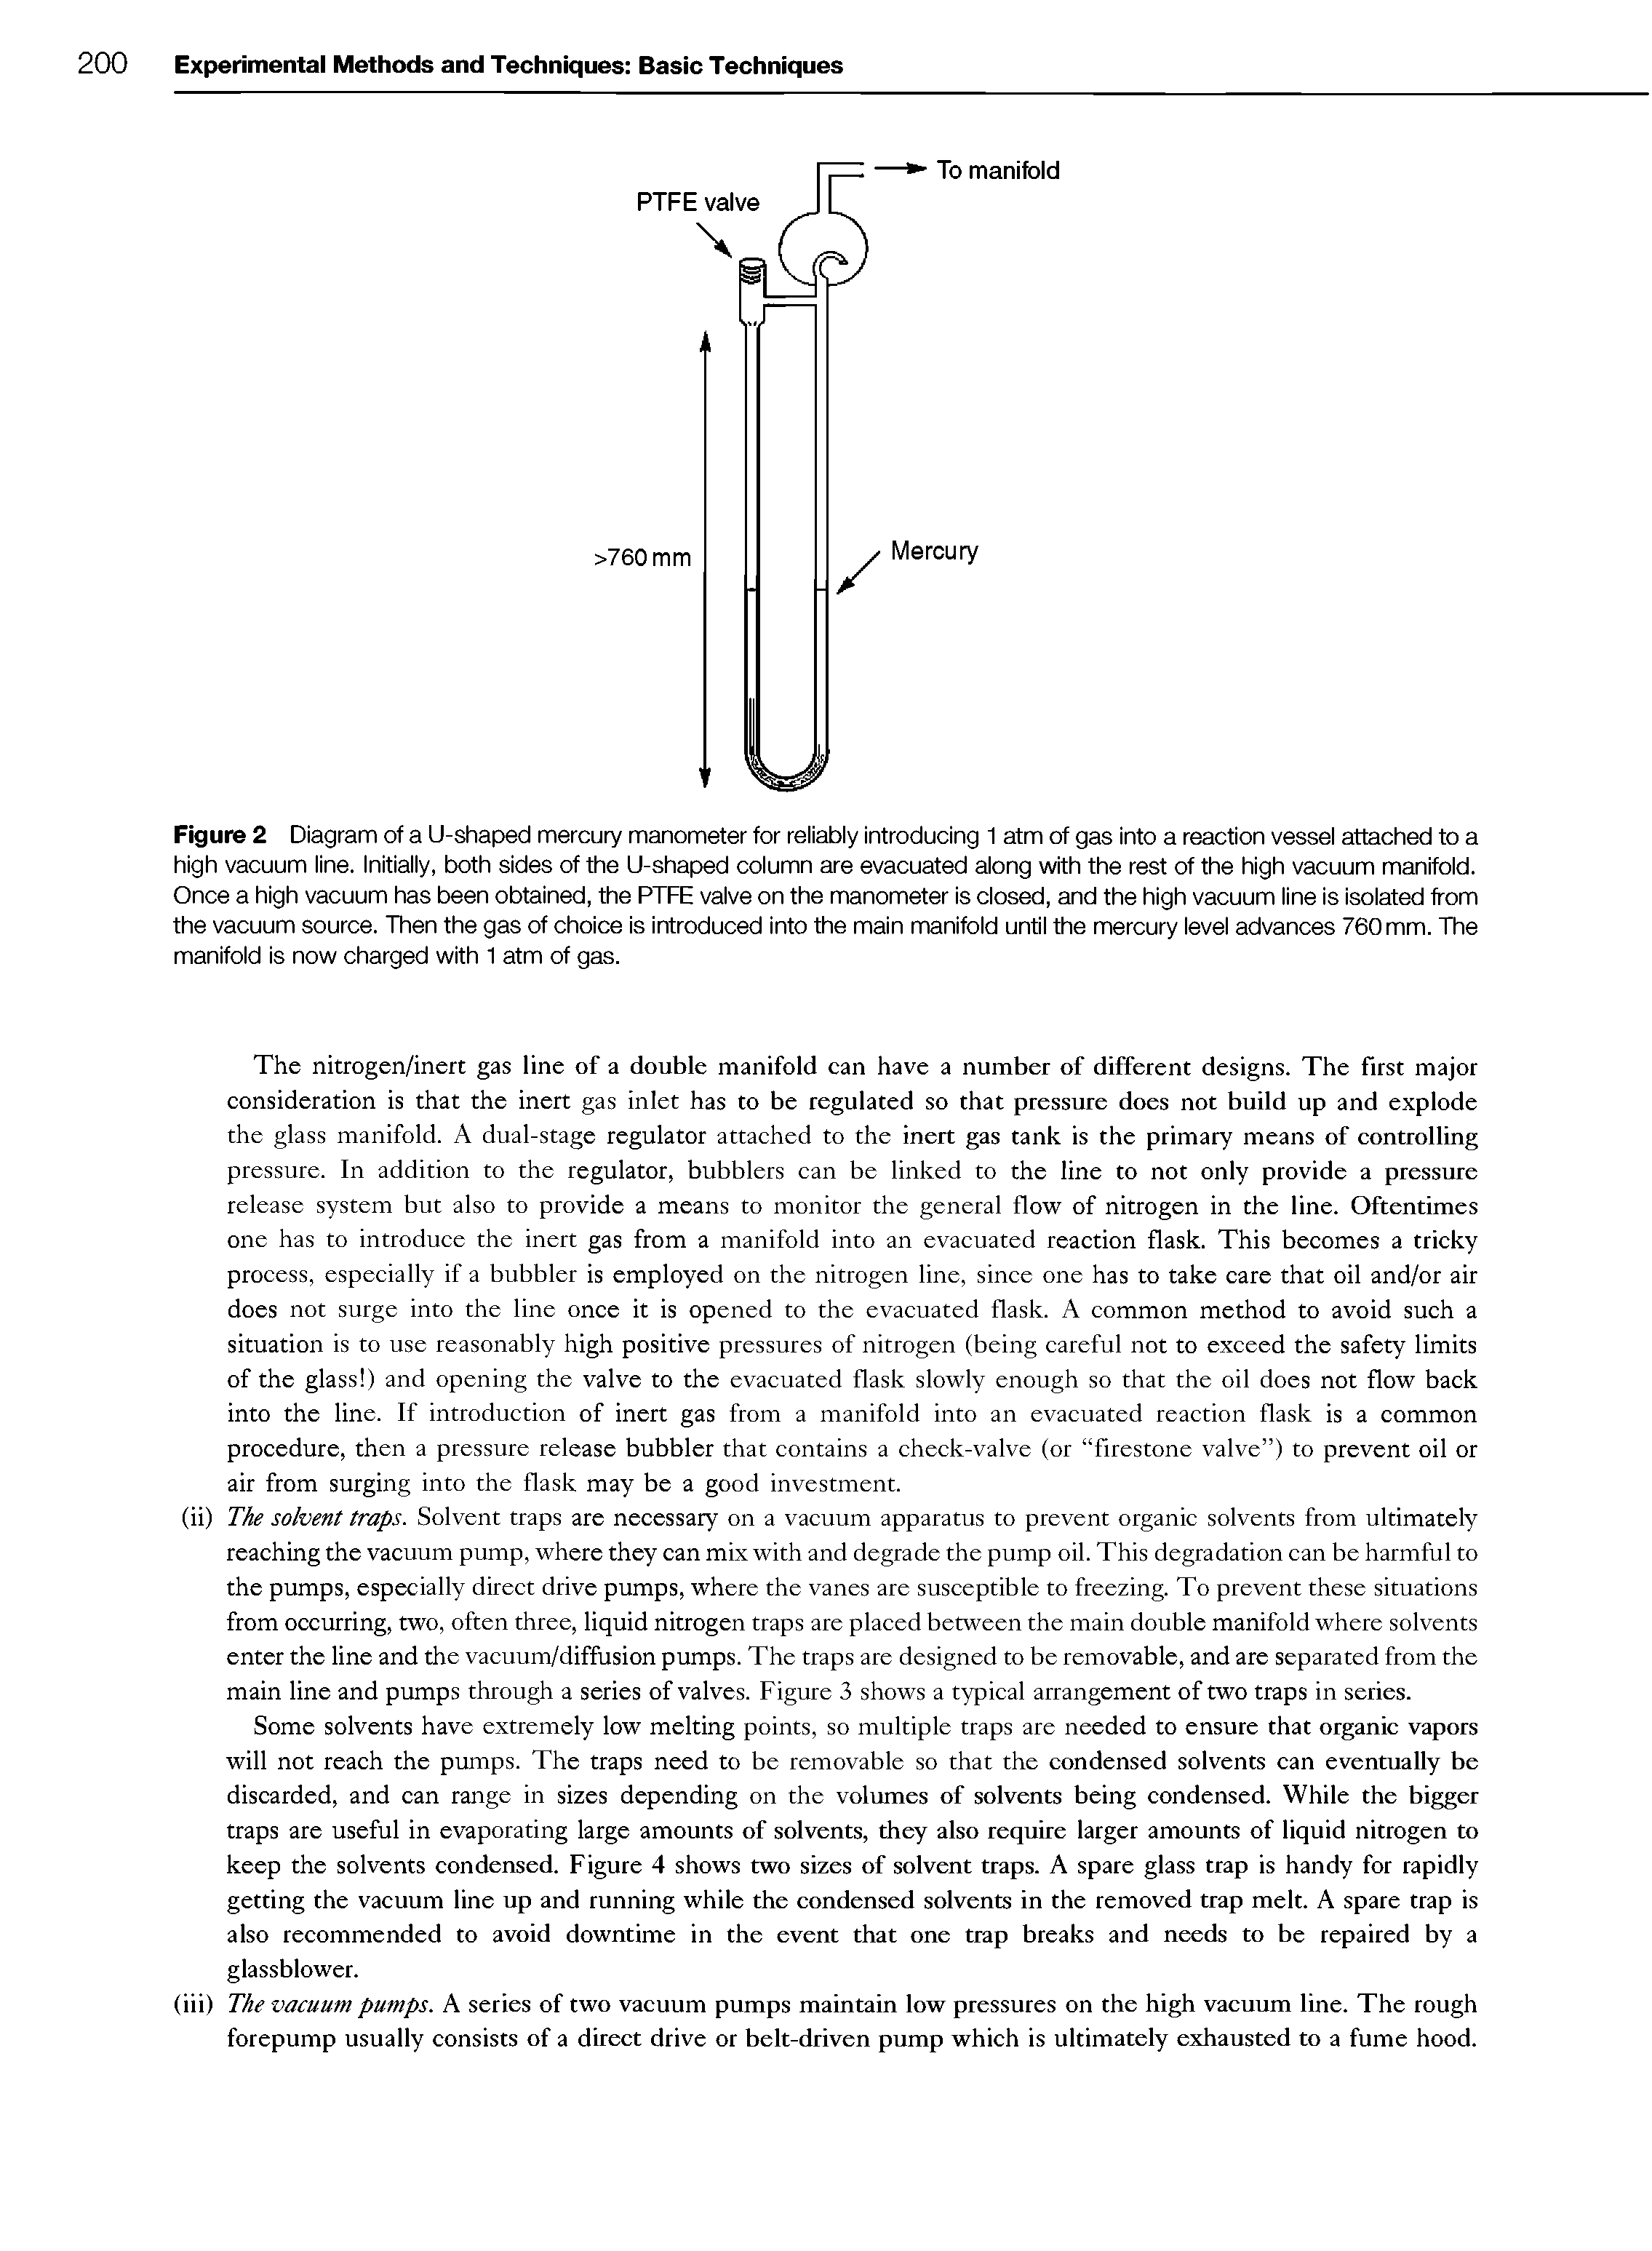 Figure 2 Diagram of a U-shaped mercury manometer for reliably introducing 1 atm of gas into a reaction vessel attached to a high vacuum line. Initially, both sides of the U-shaped column are evacuated along with the rest of the high vacuum manifold. Once a high vacuum has been obtained, the PTFE valve on the manometer is closed, and the high vacuum line is isolated from the vacuum source. Then the gas of choice is introduced into the main manifold until the mercury level advances 760 mm. The manifold is now charged with 1 atm of gas.